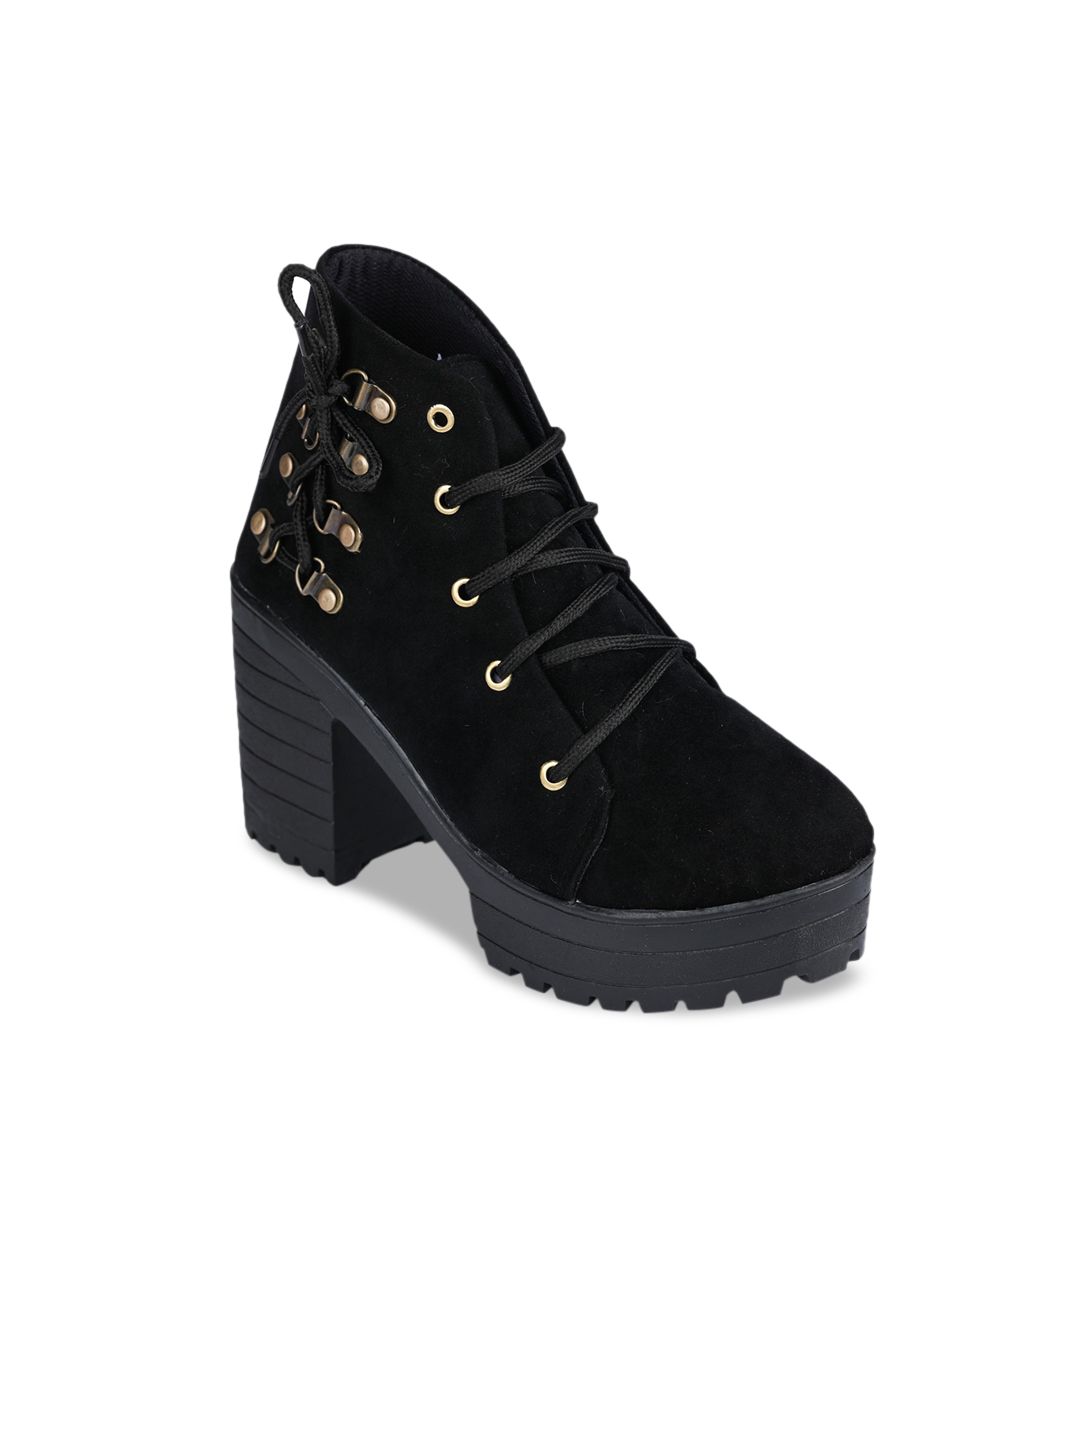 Funku Fashion Women Black Solid Suede Mid-Top Heeled Boots Price in India